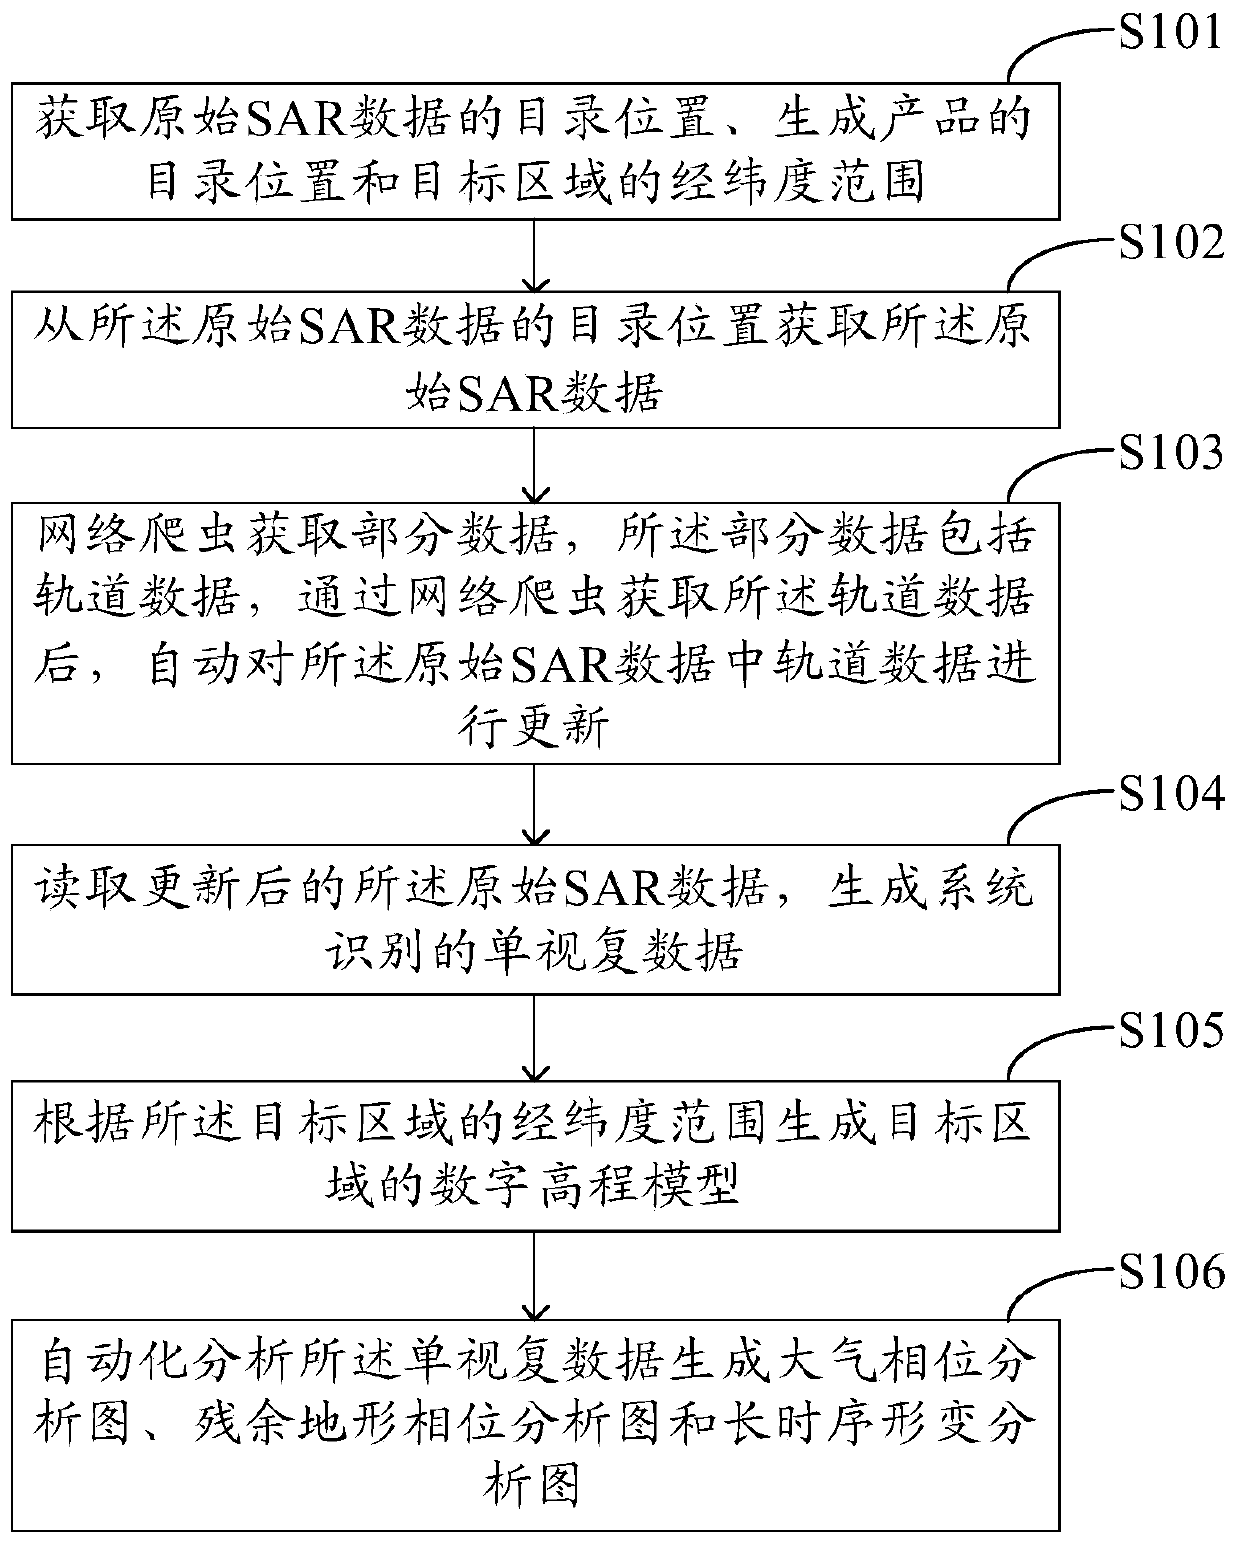 Long time sequence automatic interferometry system and method